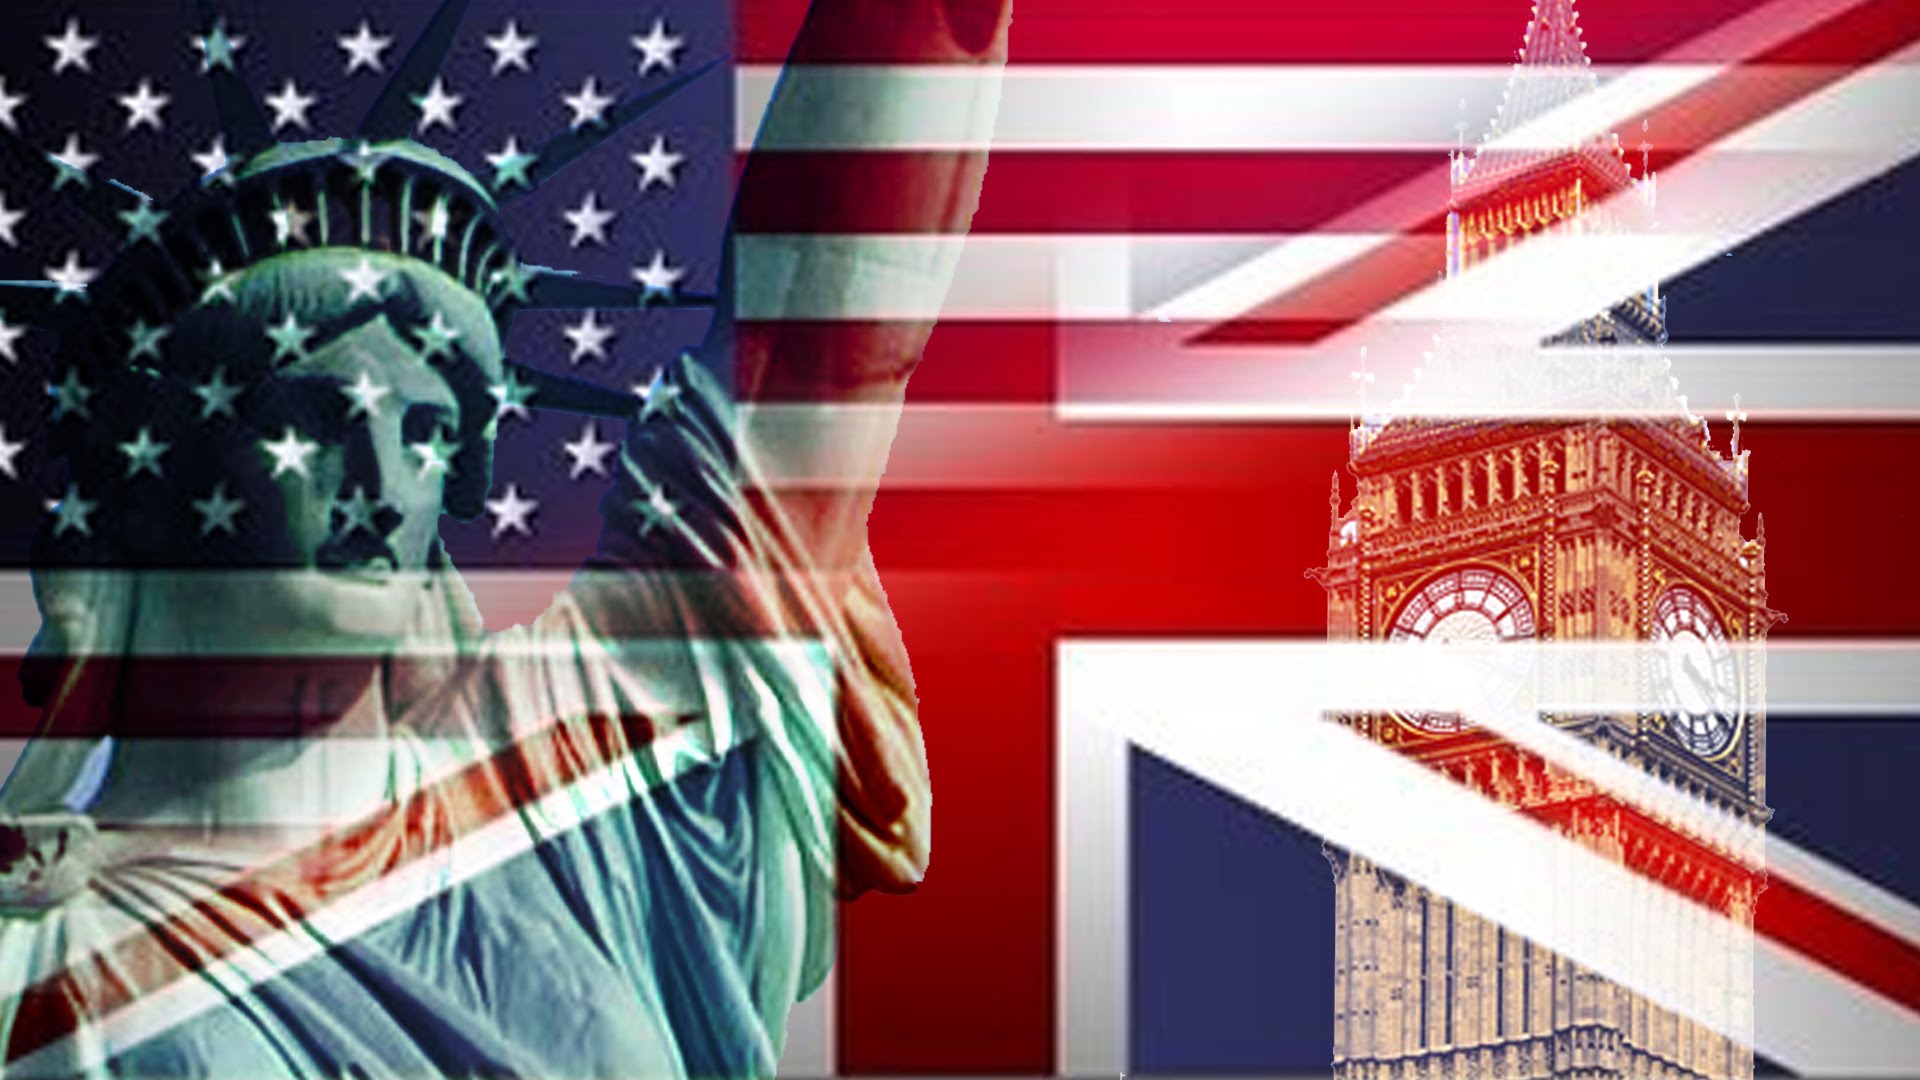 British English Vs. American English: What’s The Difference?